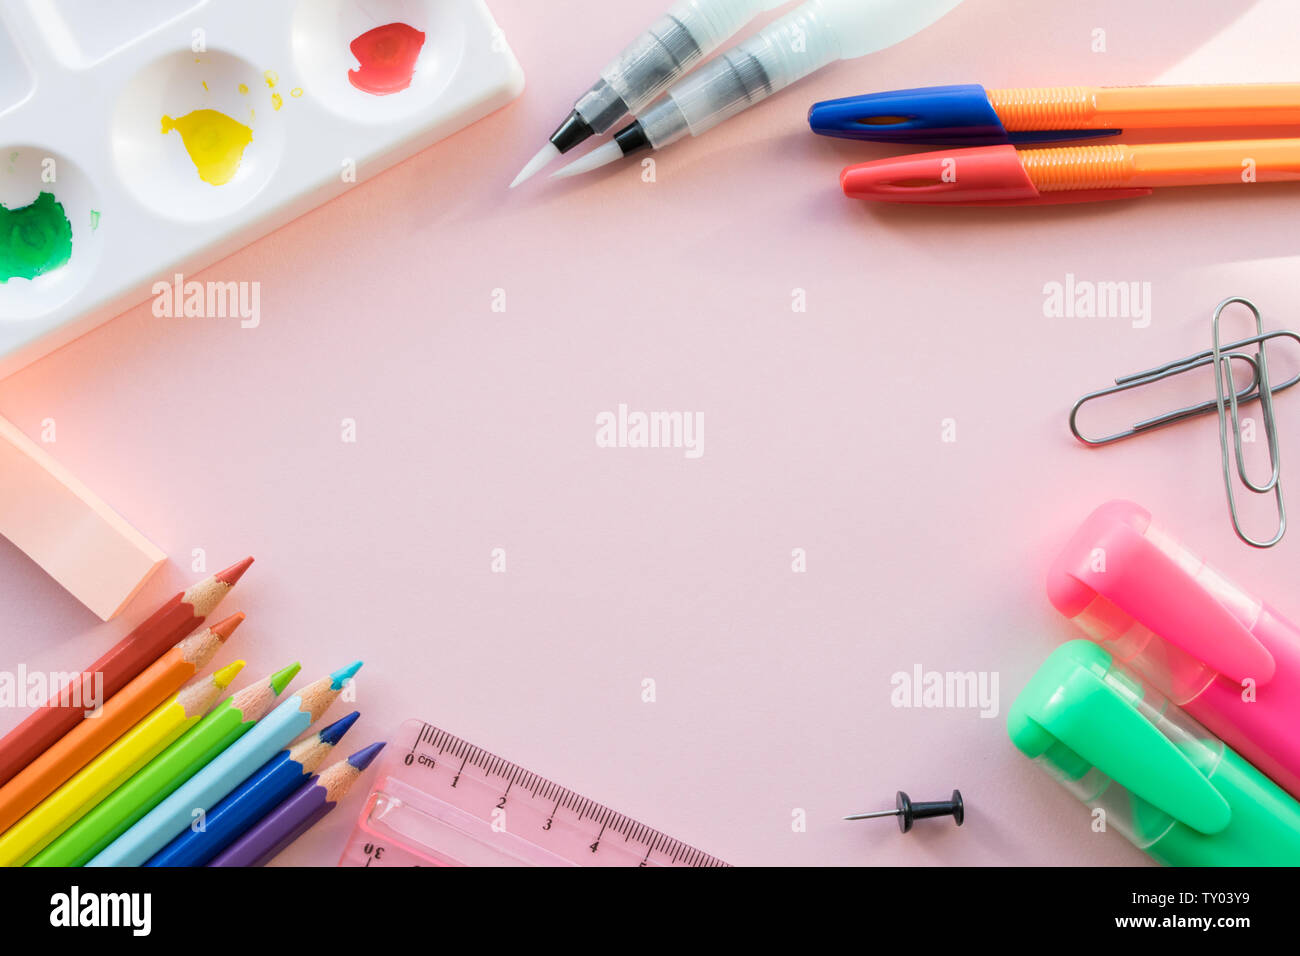 School drawing supplies on pink background. Free space for text Stock Photo